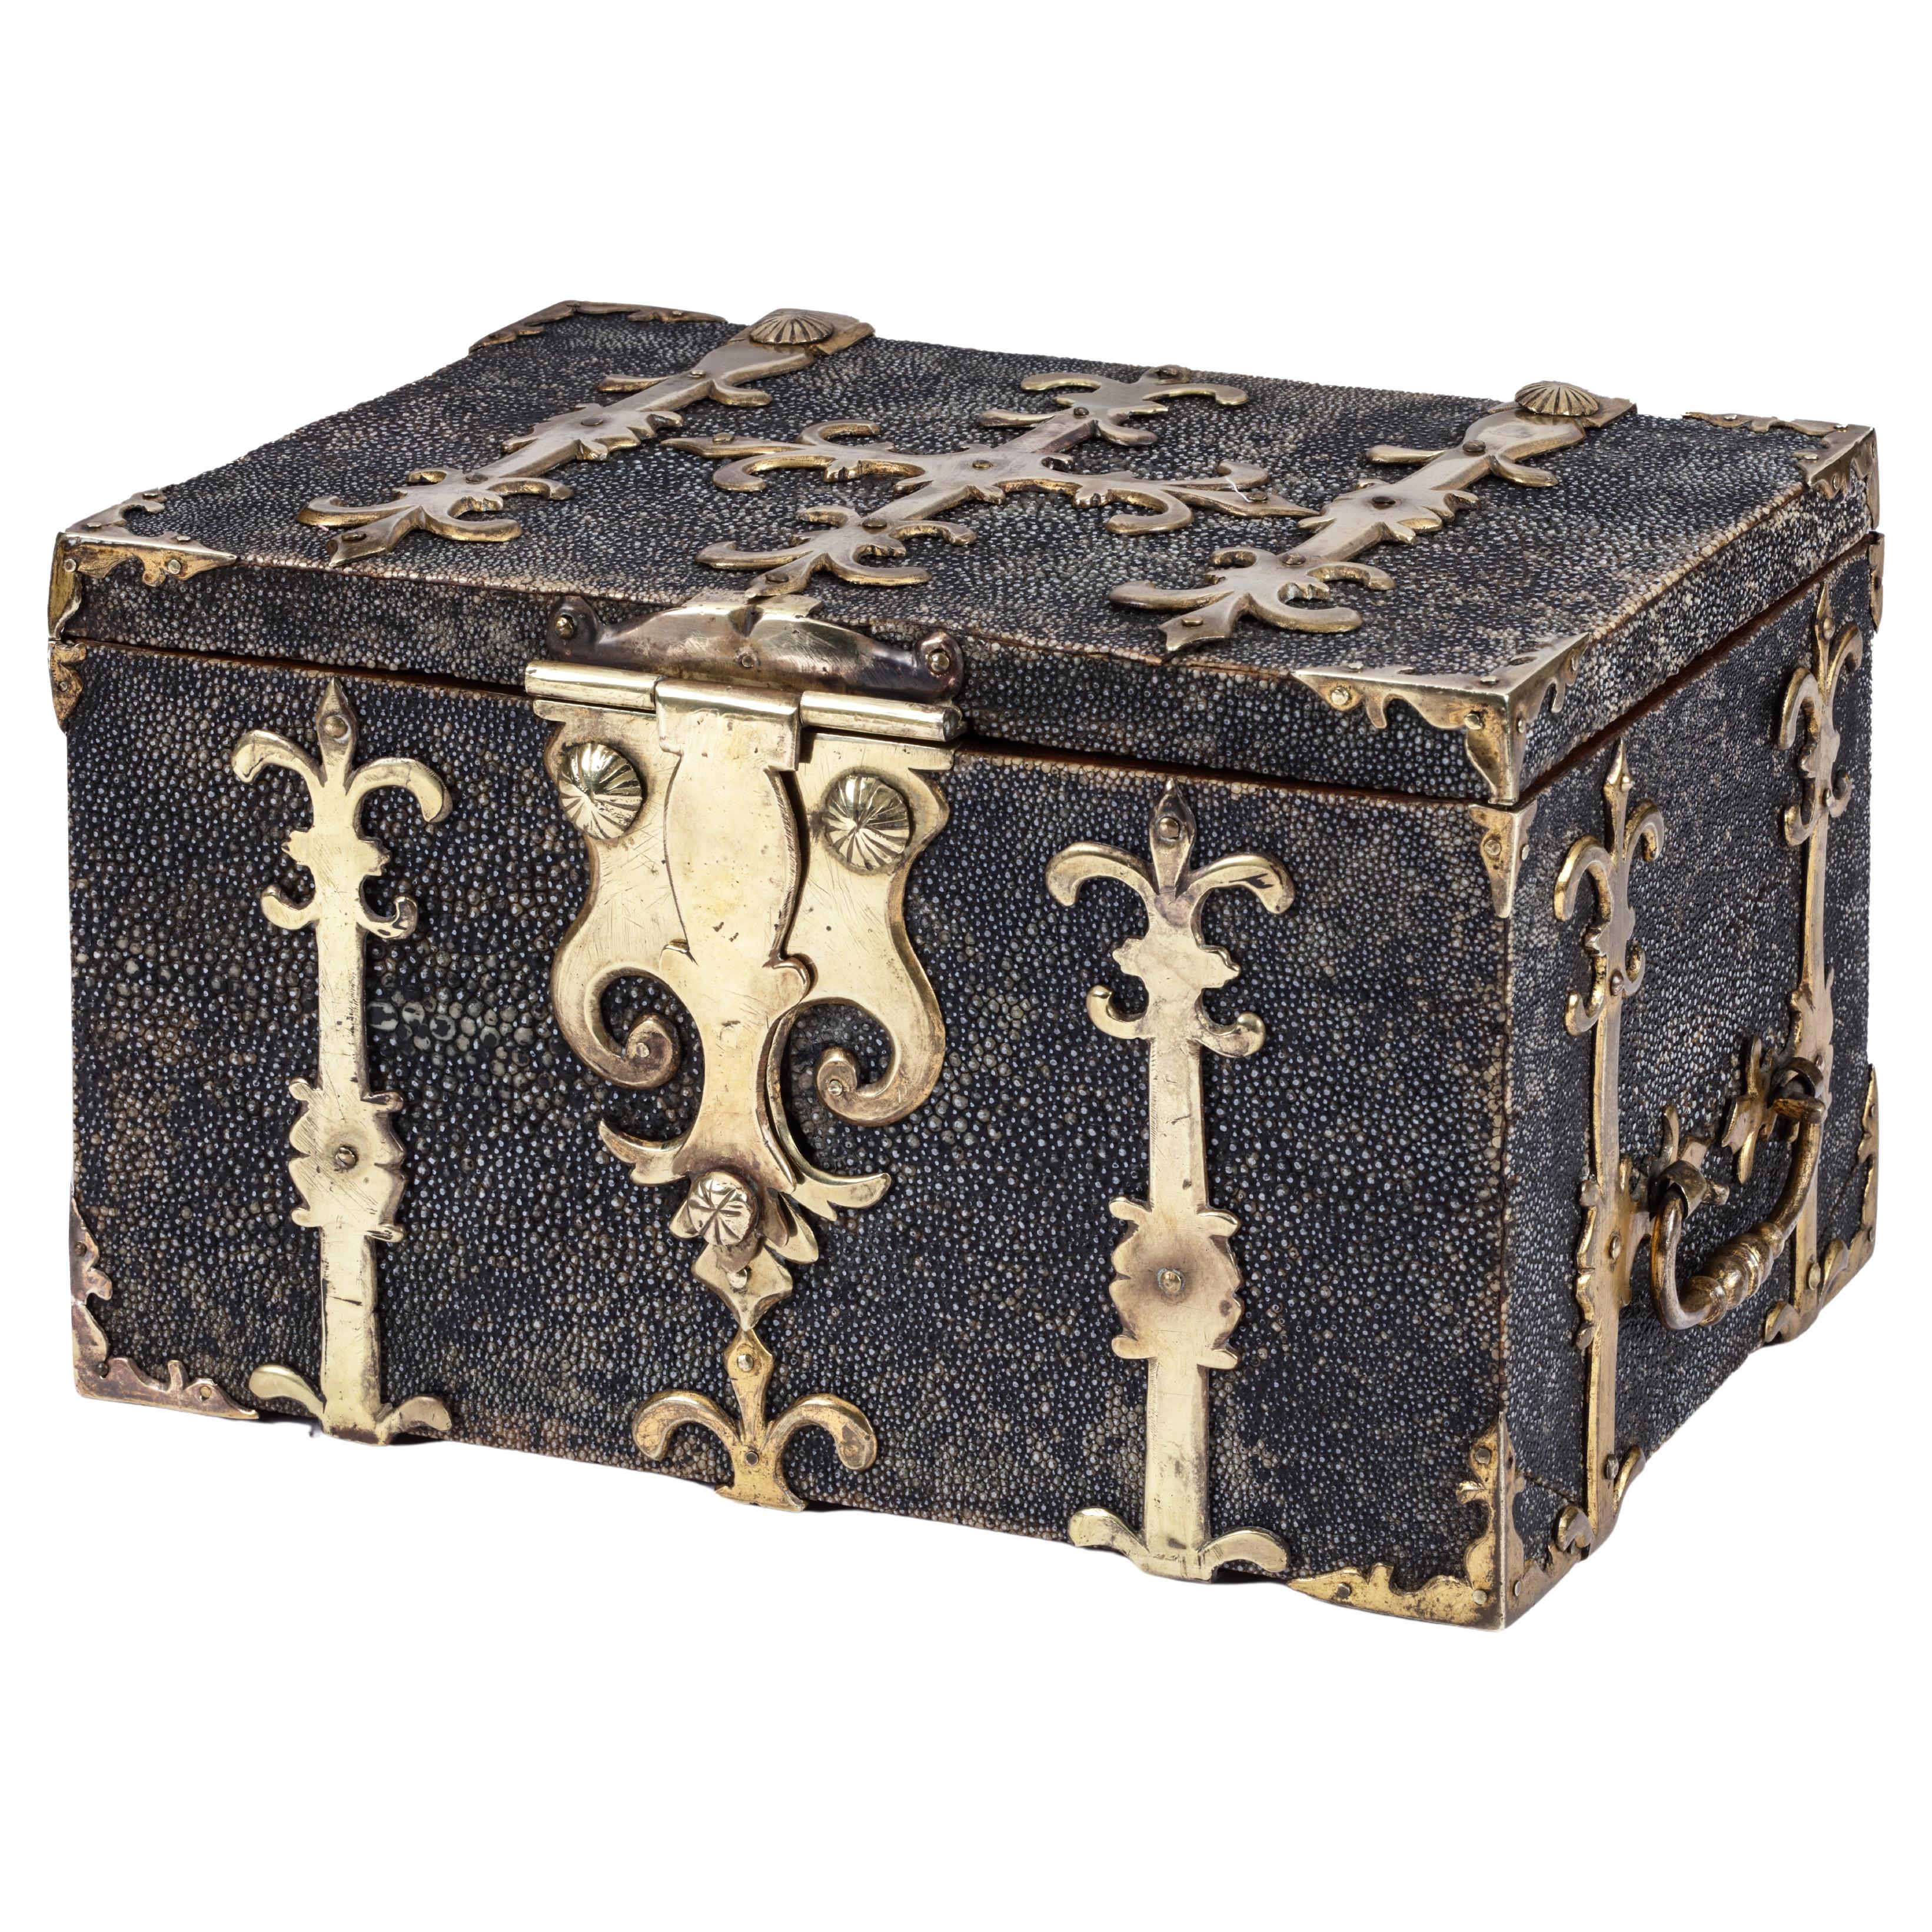 17th Century Shagreen Captain's Chest, Coffre Fort or Strongbox with Gilt Mounts